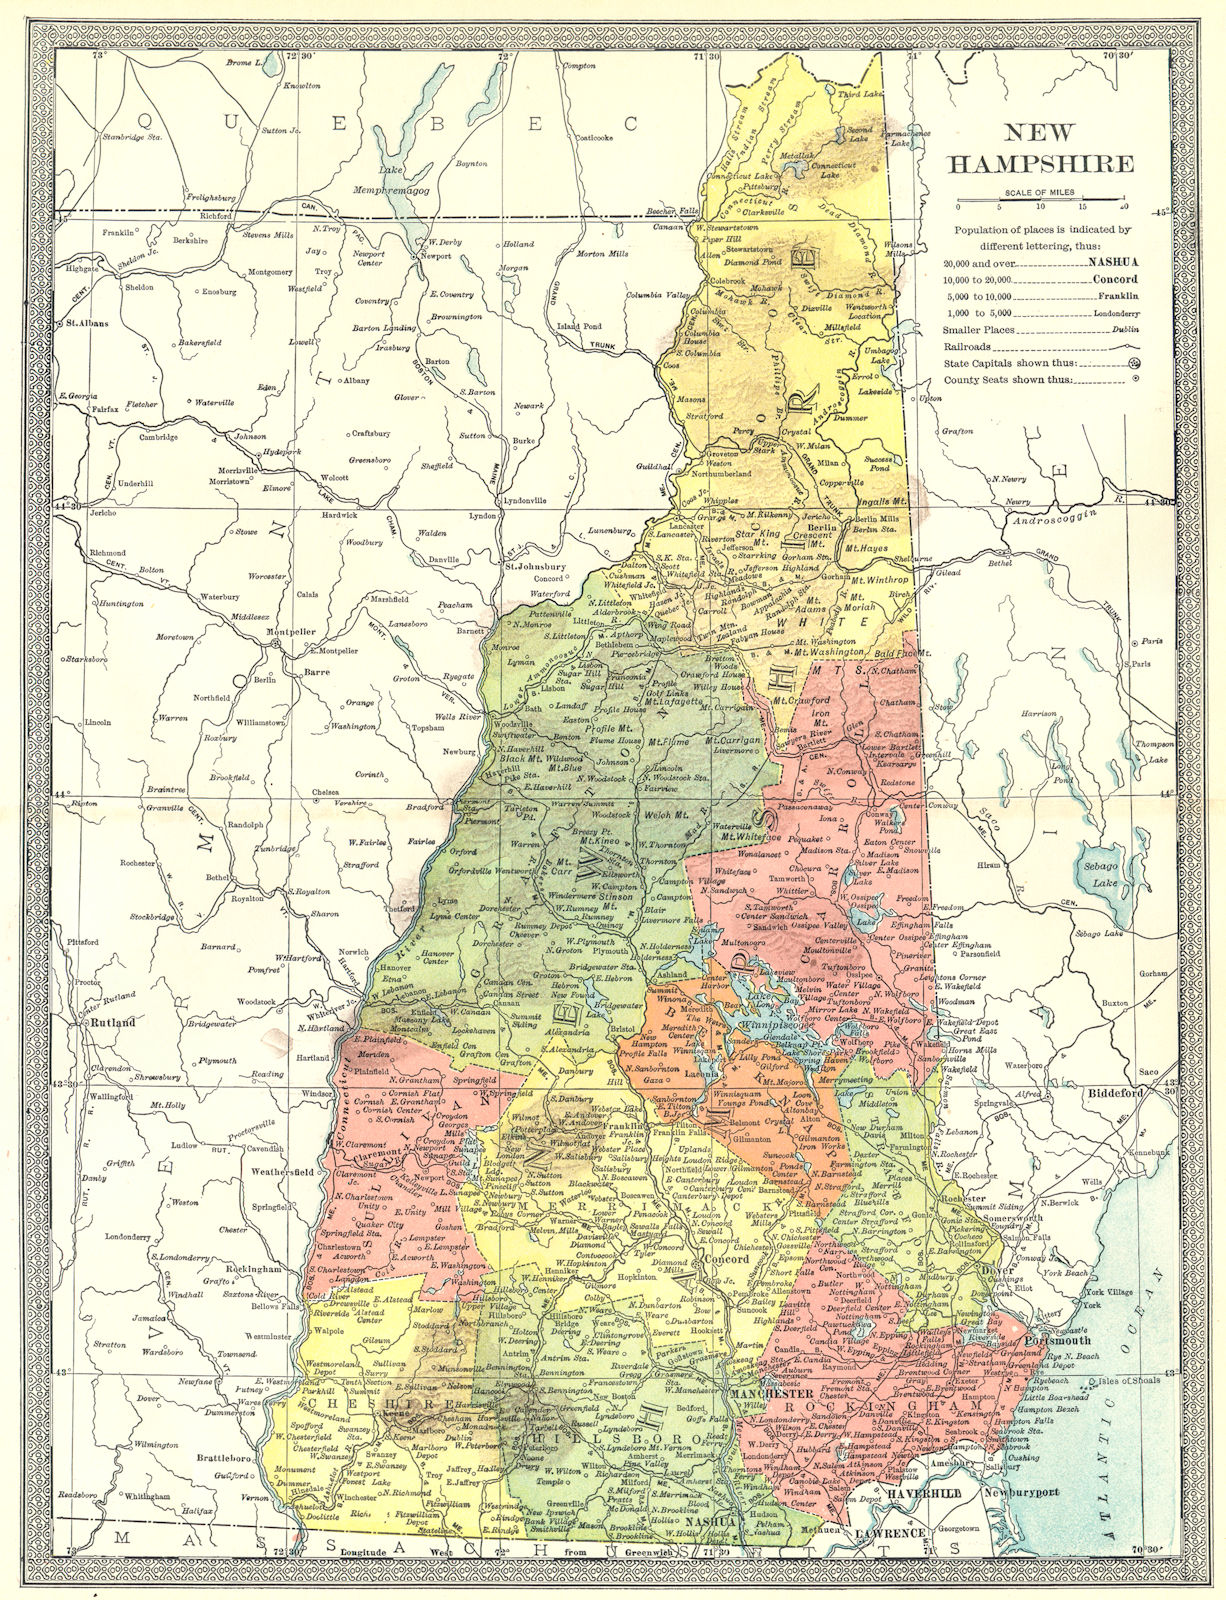 Associate Product NEW HAMPSHIRE state map. Counties 1907 old antique vintage plan chart